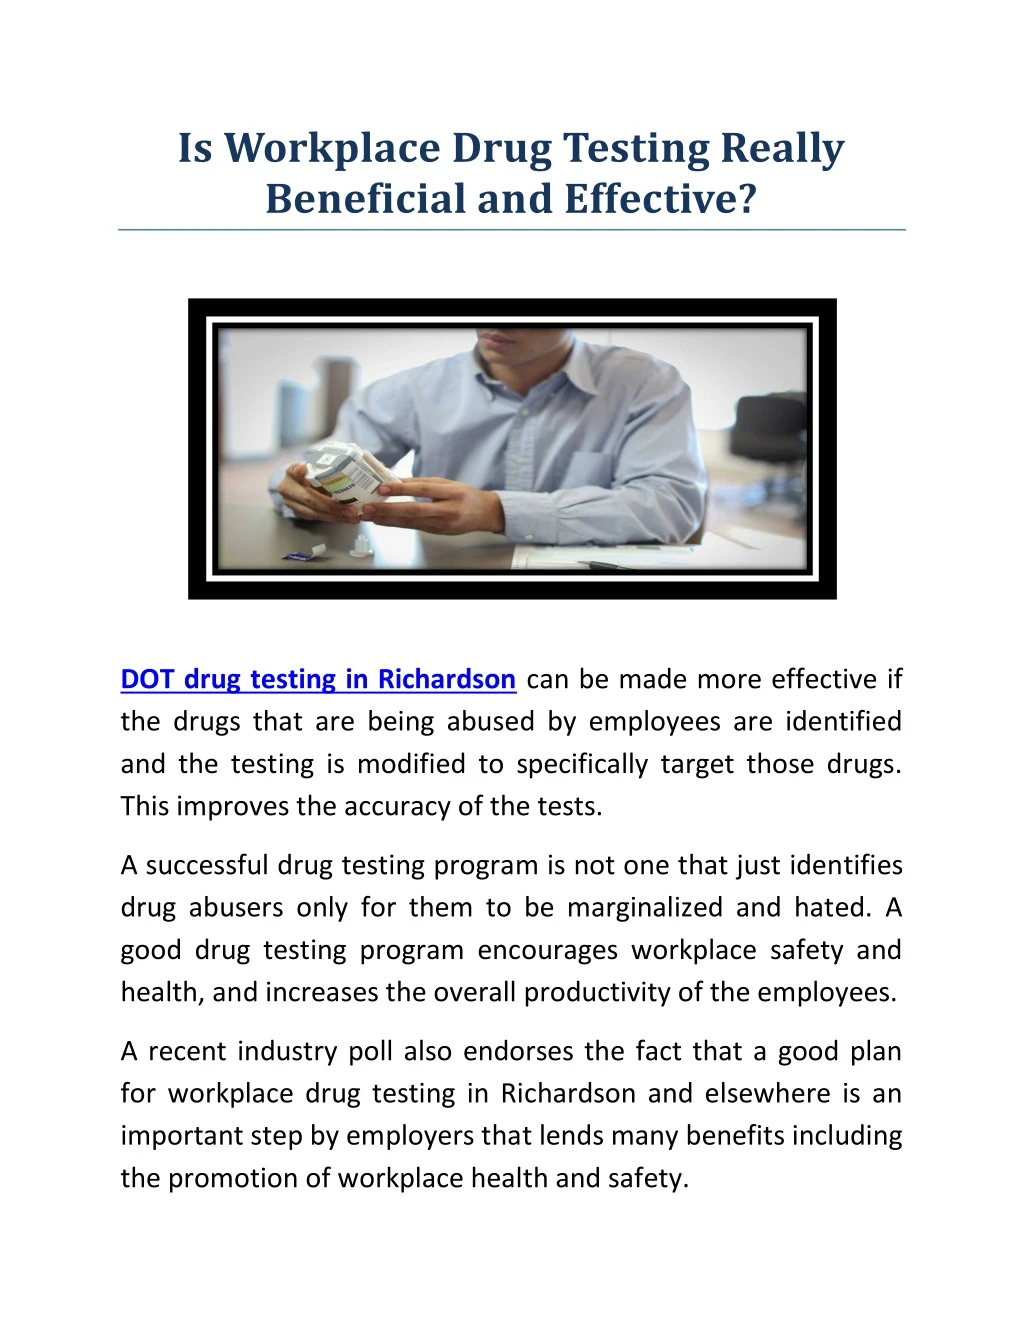 is workplace drug testing really beneficial